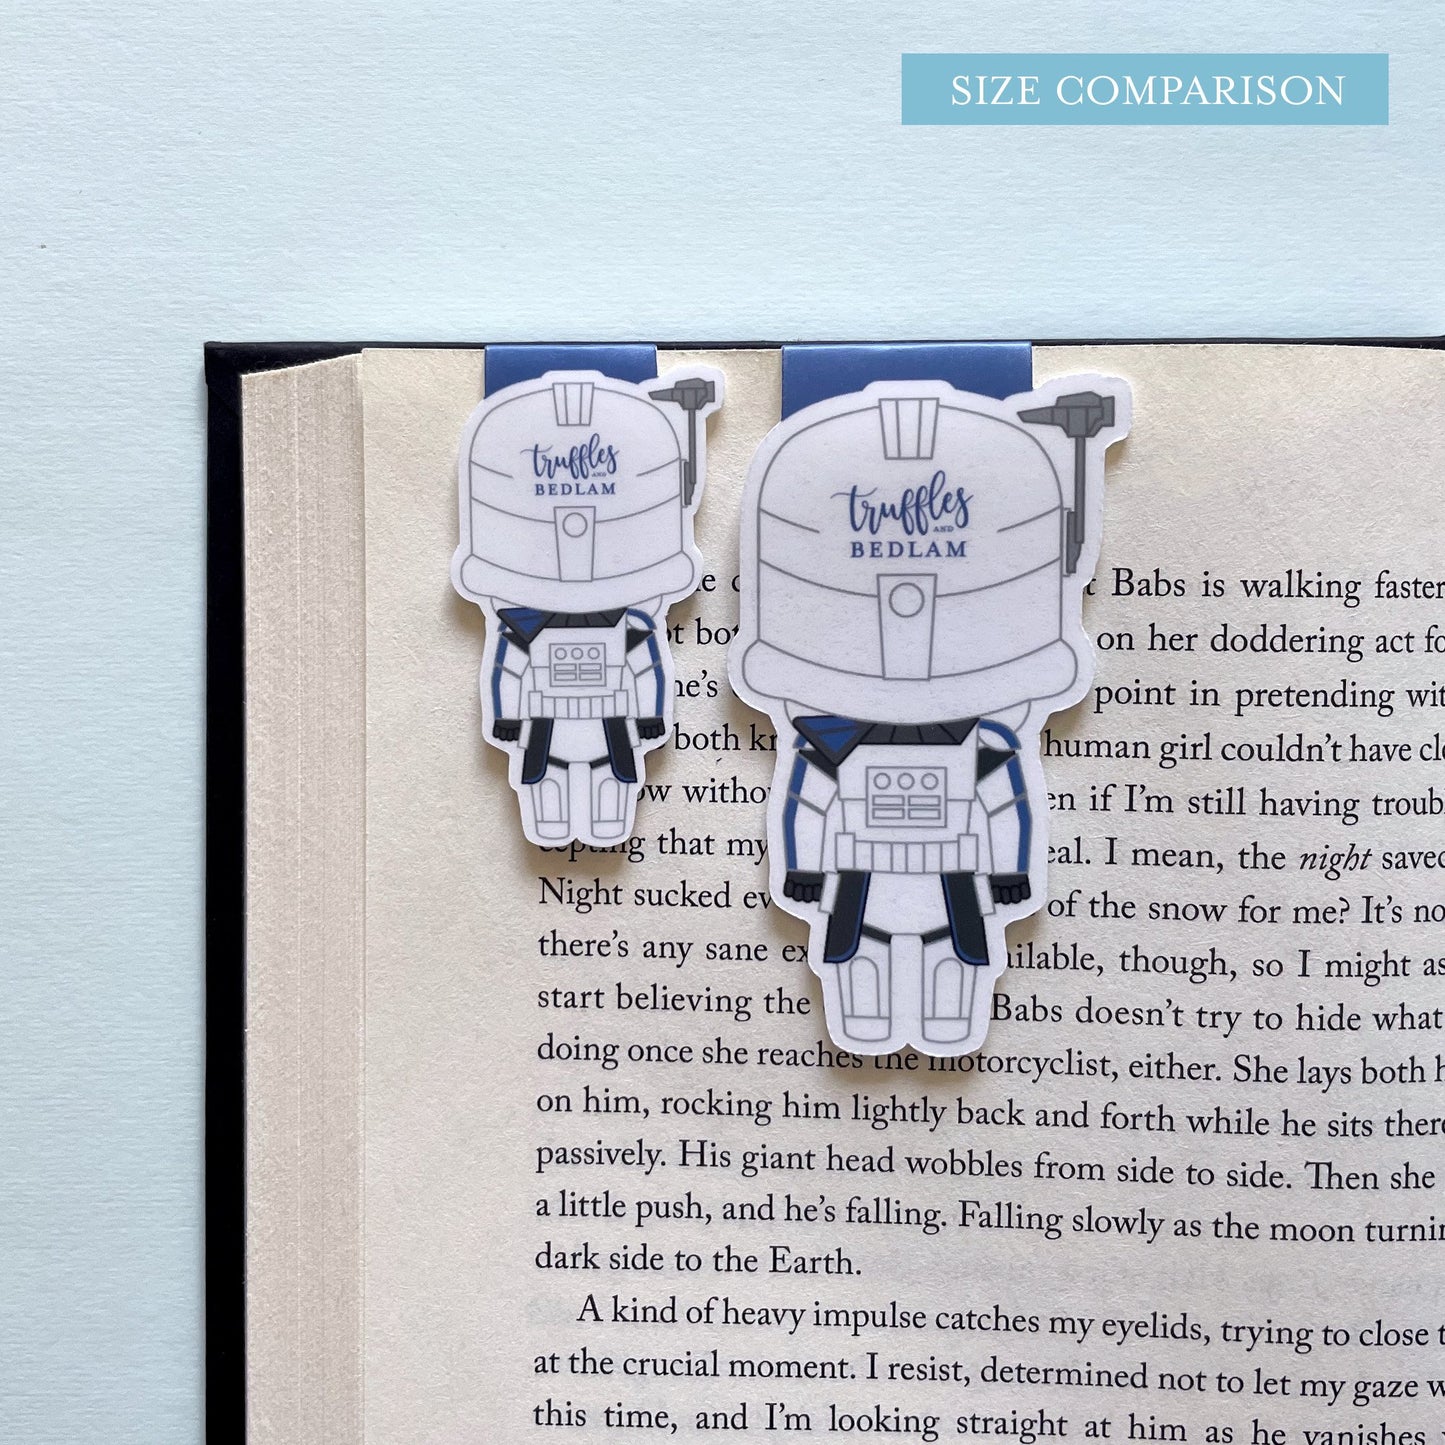 Space Wizards "Clones" Cody, Wolffe, and Rex Magnetic Bookmark Trio